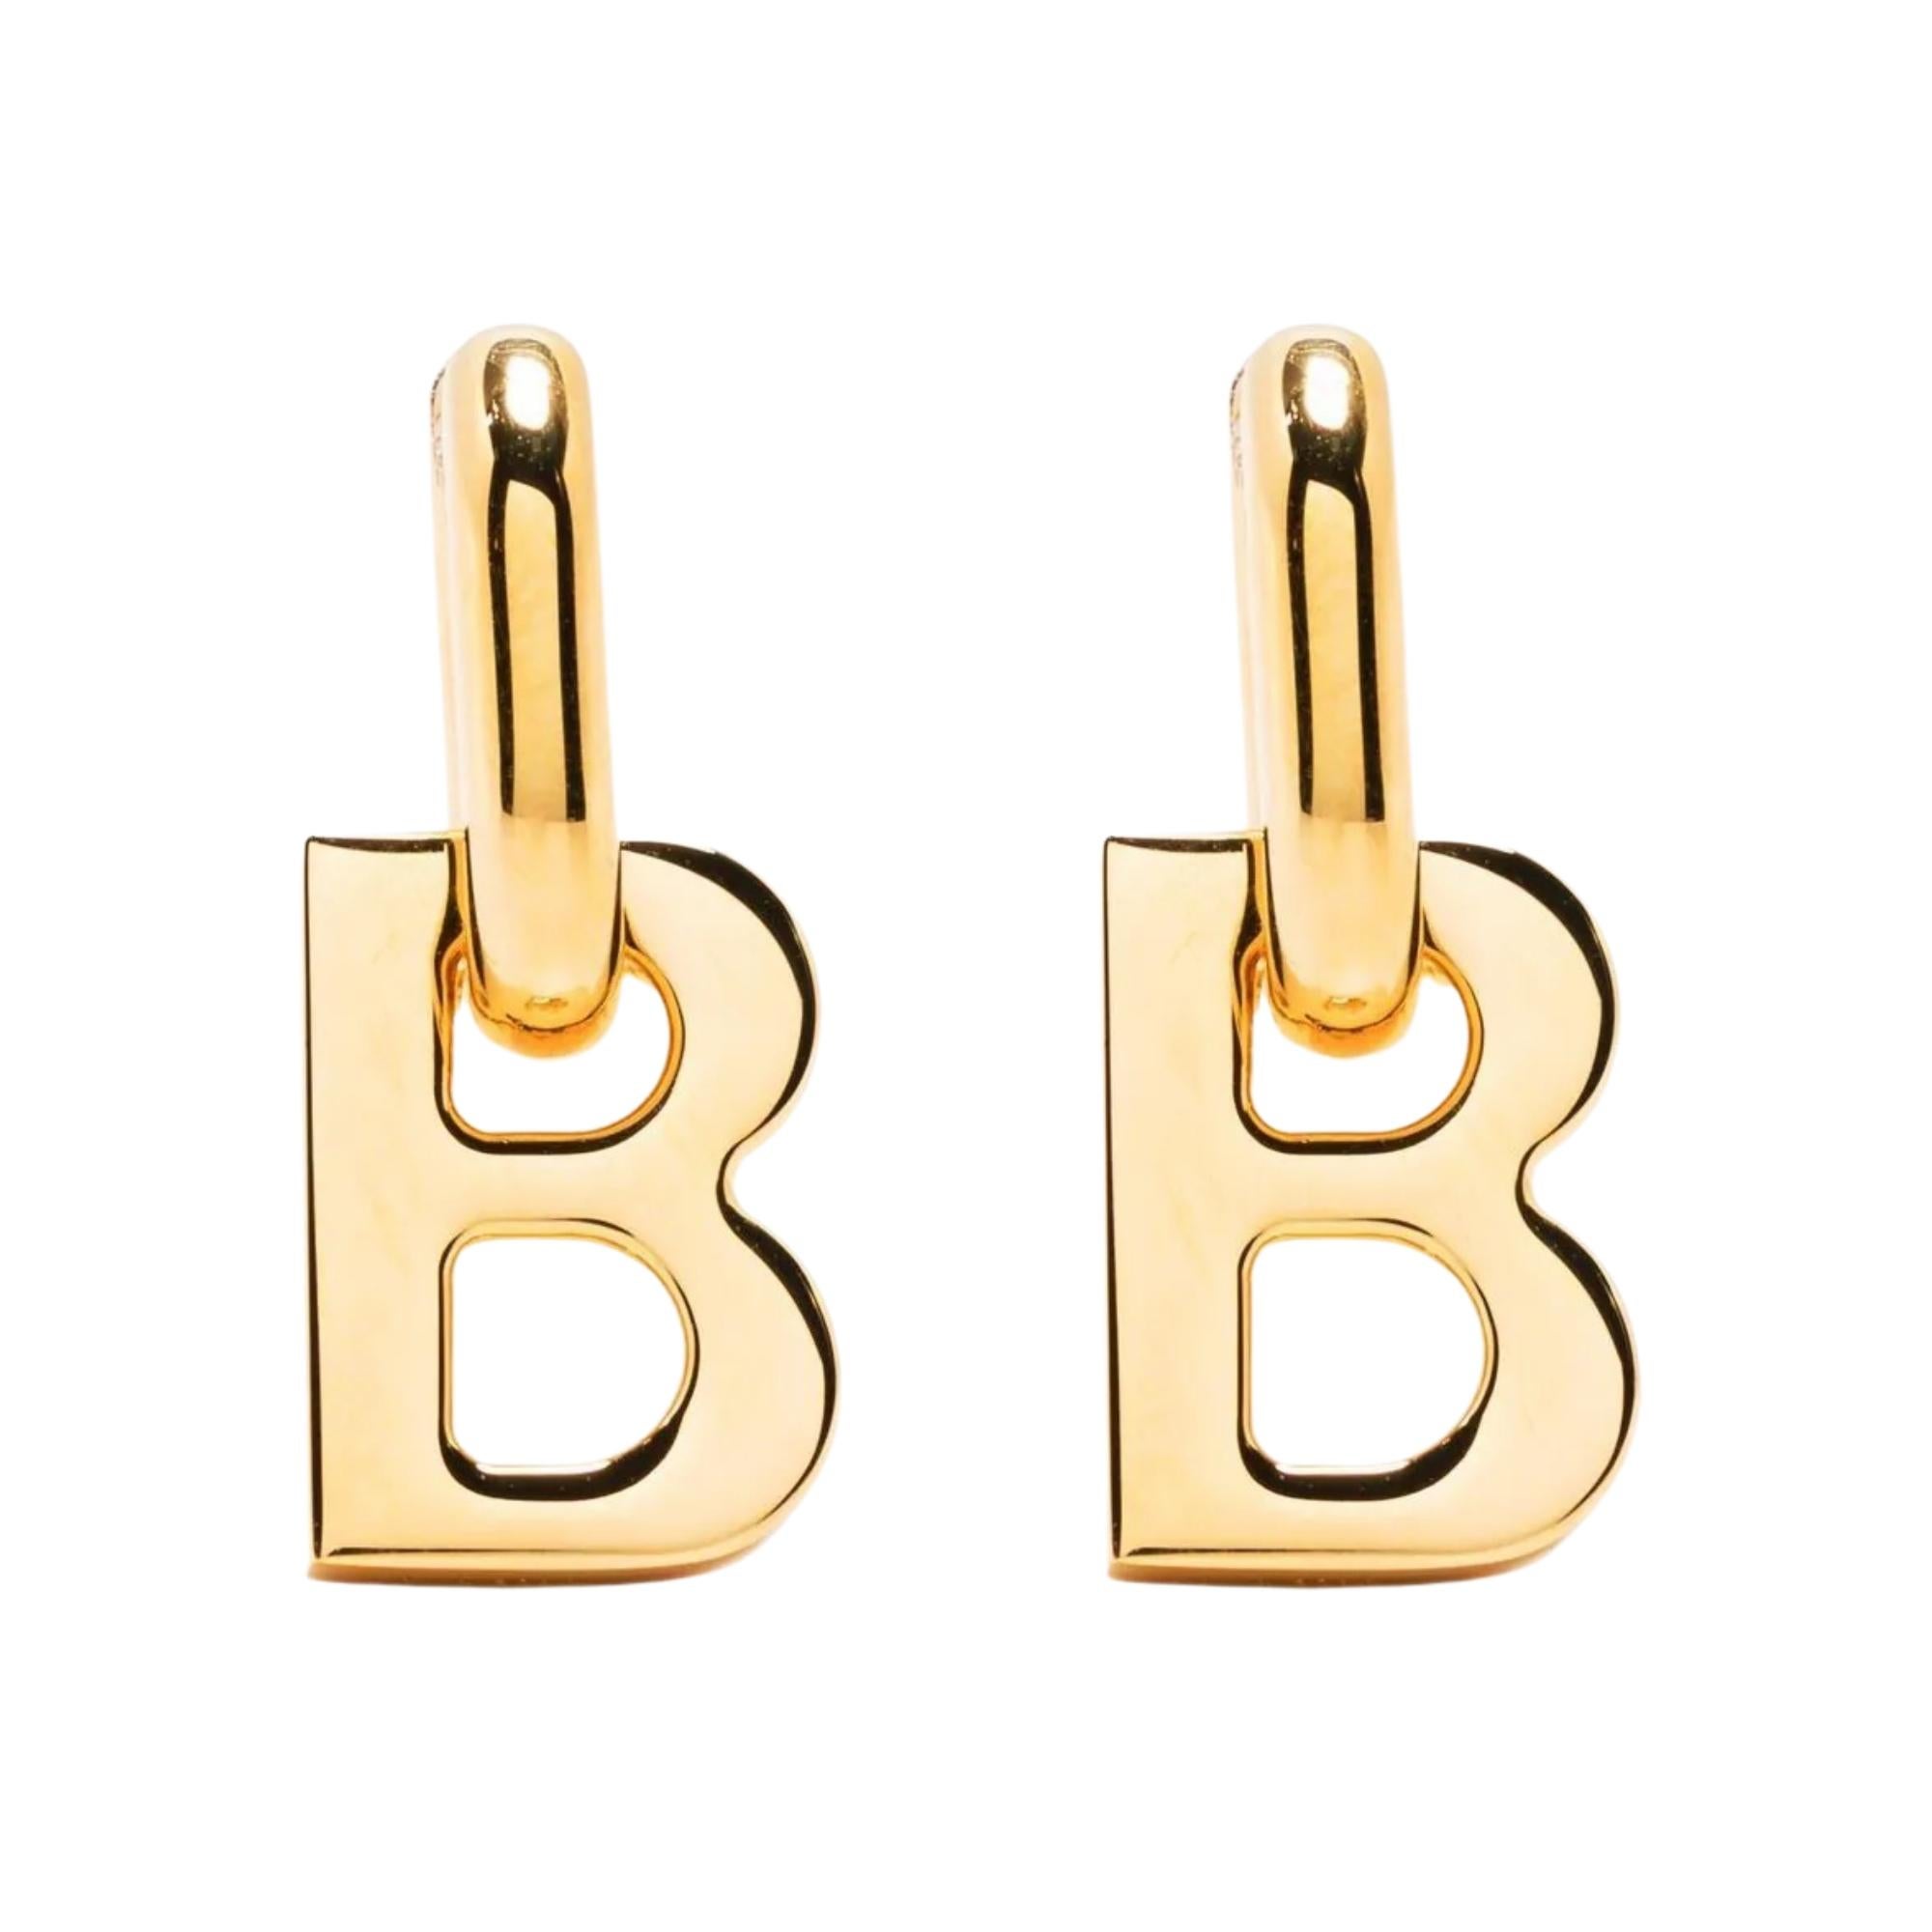 These Balenciaga drop earrings are constructed of gold-tone brass and feature a logo B pendant. The logo pendant is detachable at drop. Logo engraved at side. Hinged-post fastening.

Color: shiny gold tone
Material: Brass
Marks: Logo stamp & Made in